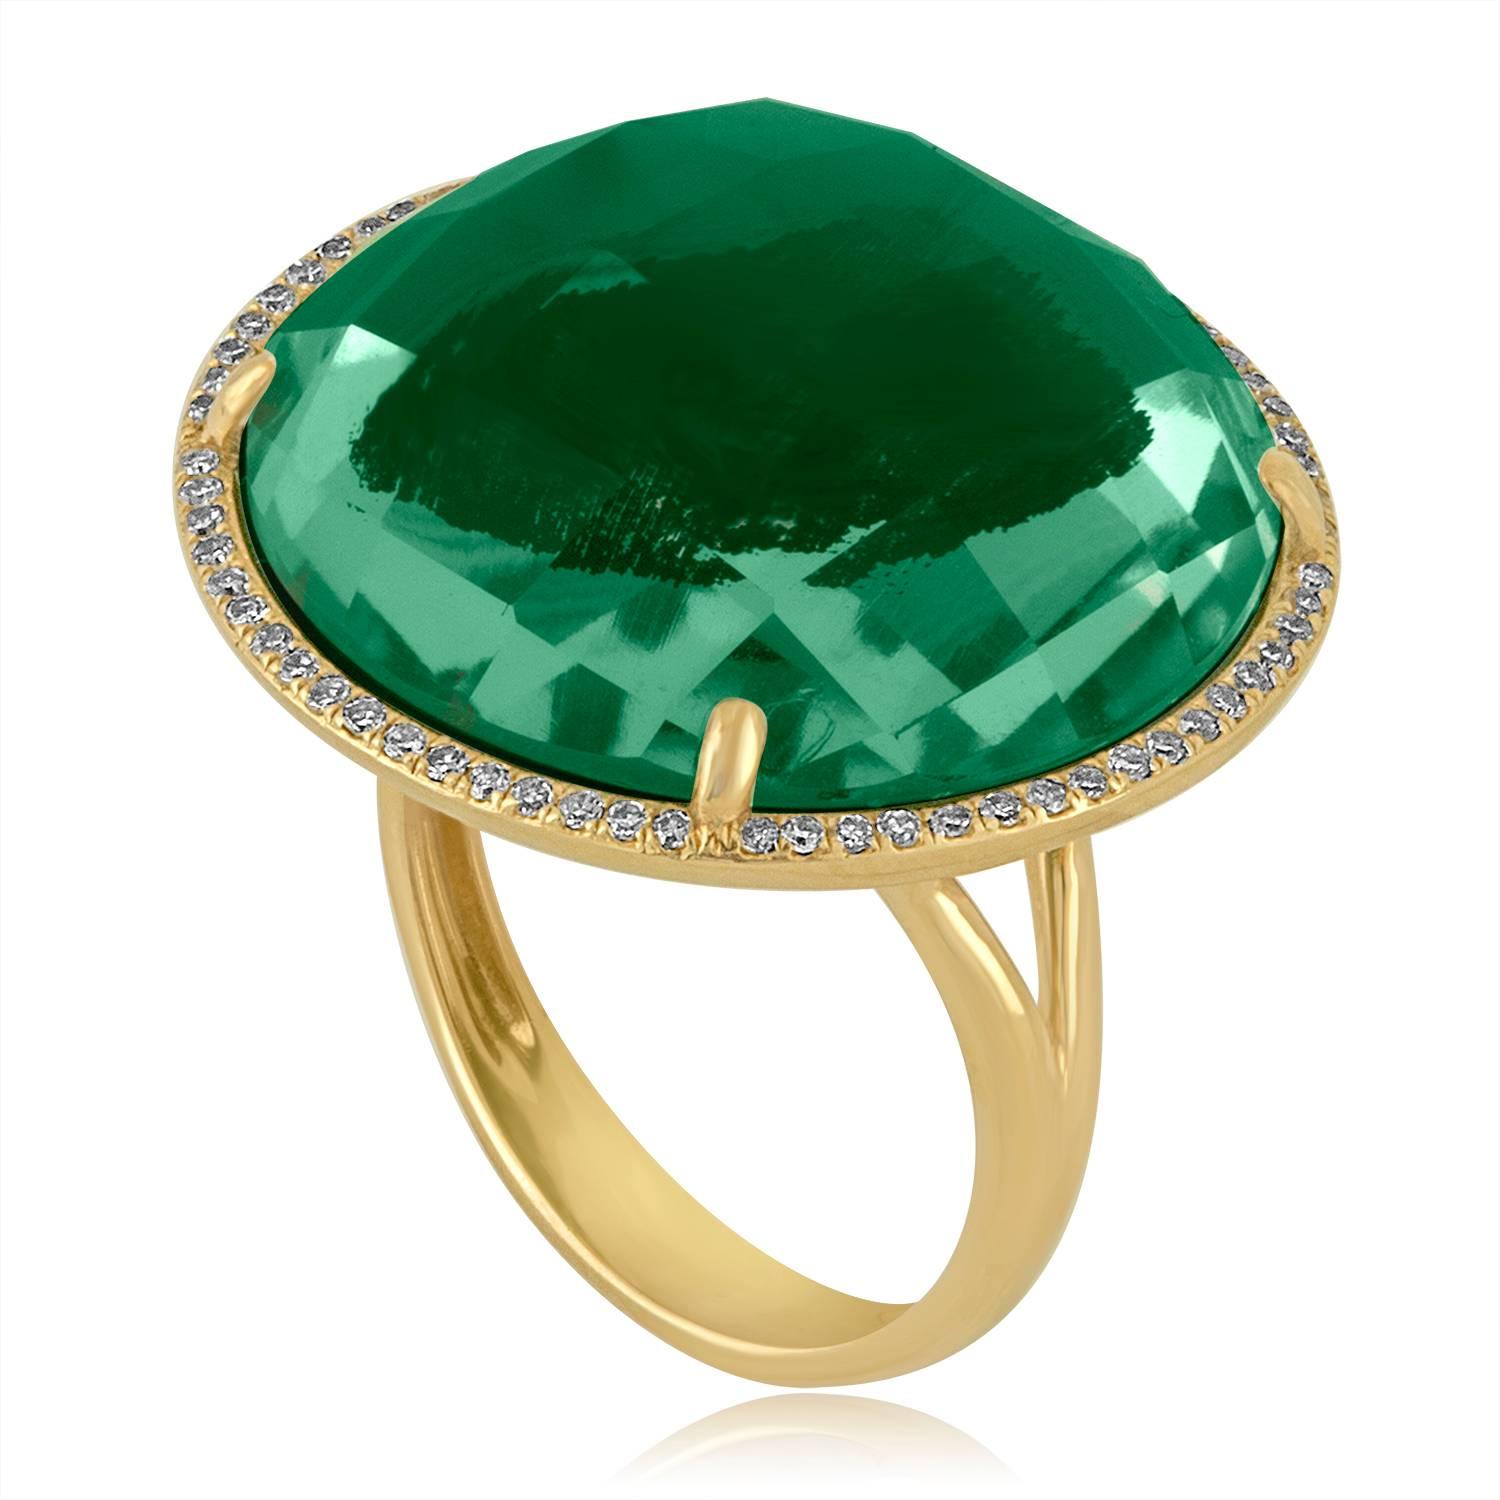 Sliced to display their natural variations in character.
The green agate slice is topped with clear faceted white topaz.
The slices are set in 14K Yellow Gold and surrounded by Diamonds. 
There are 0.22ct in Diamonds H/I SI. 
There are 15.80ct